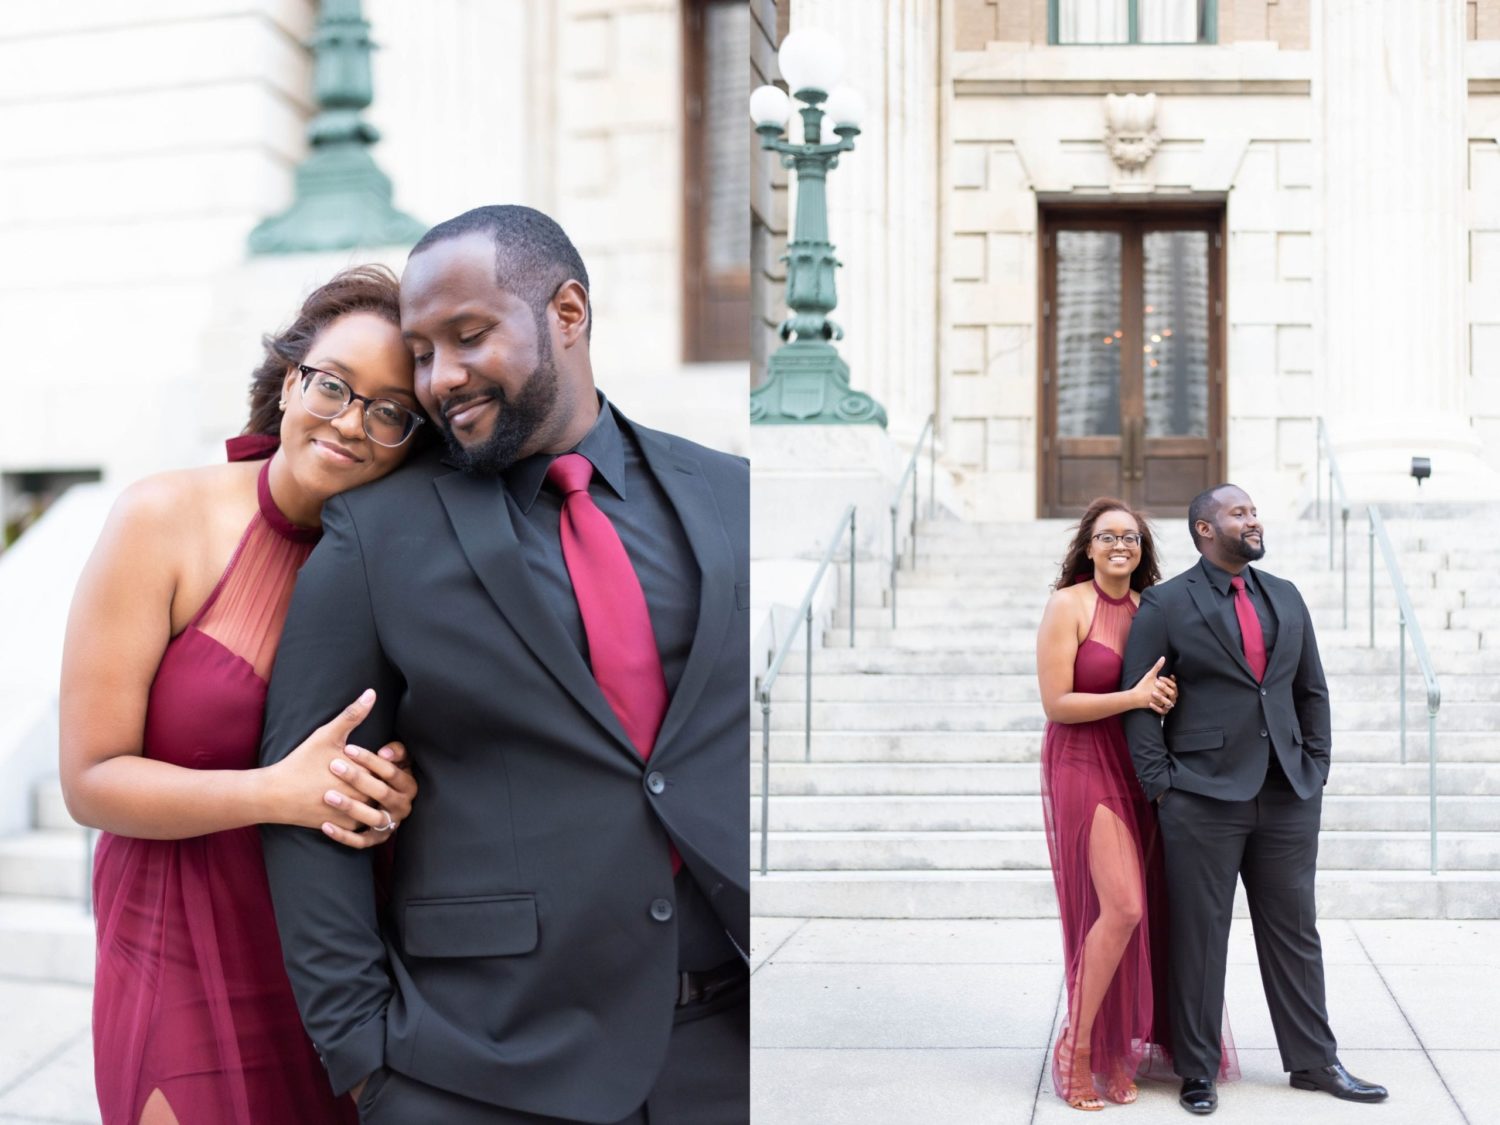 Le meridien tampa wedding photographer formal outfits black tuxedo and wine red gown couple posing at camera